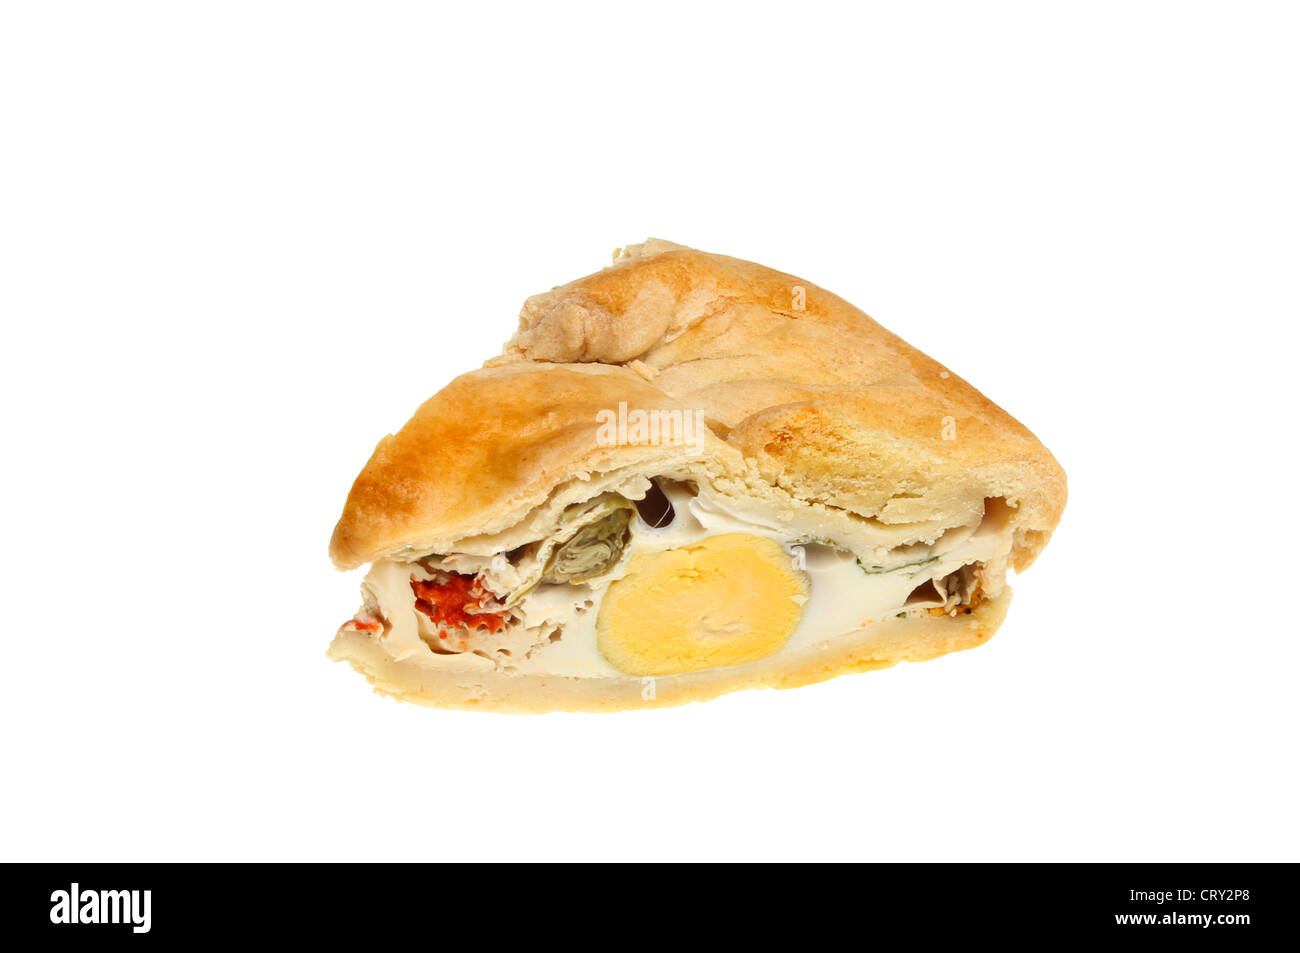 Portion of an egg and vegetable pie isolated against white Stock Photo